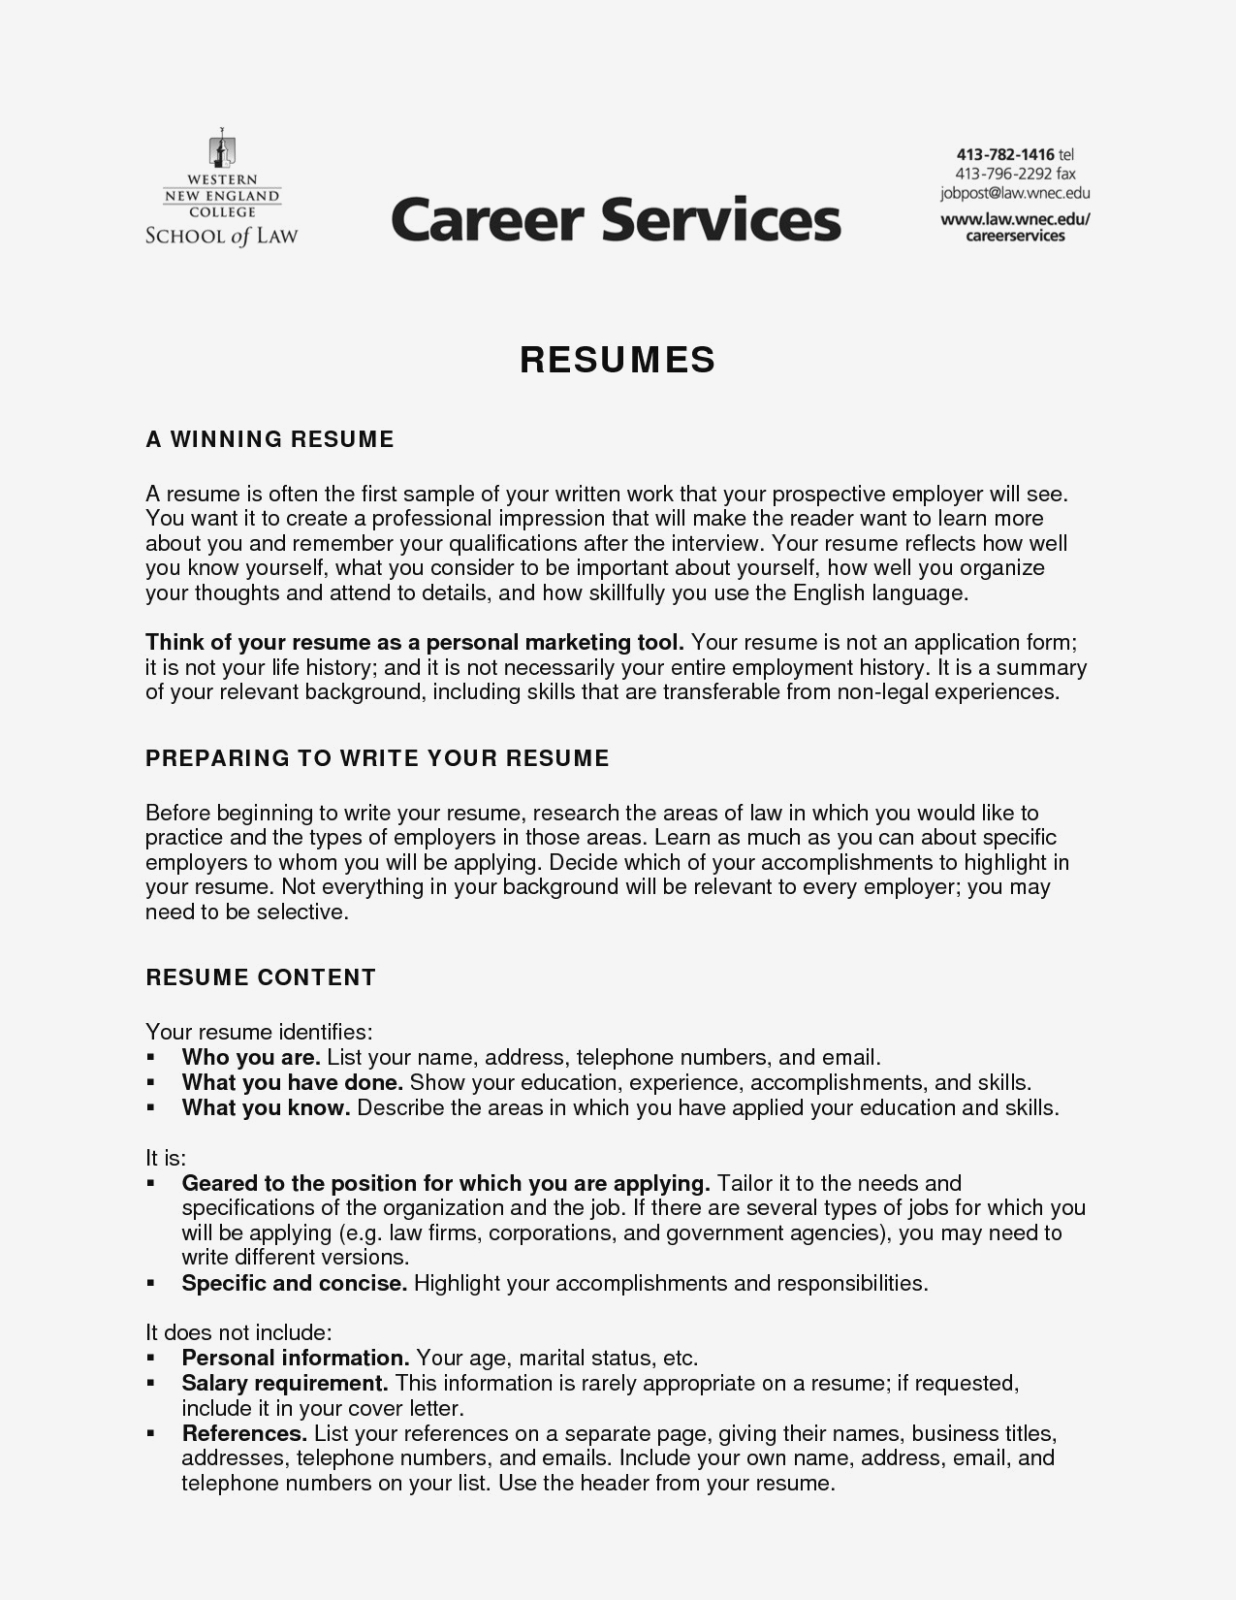 Resume Profile Examples  Quiz How Much Do You Know Resume And Form Template Ideas